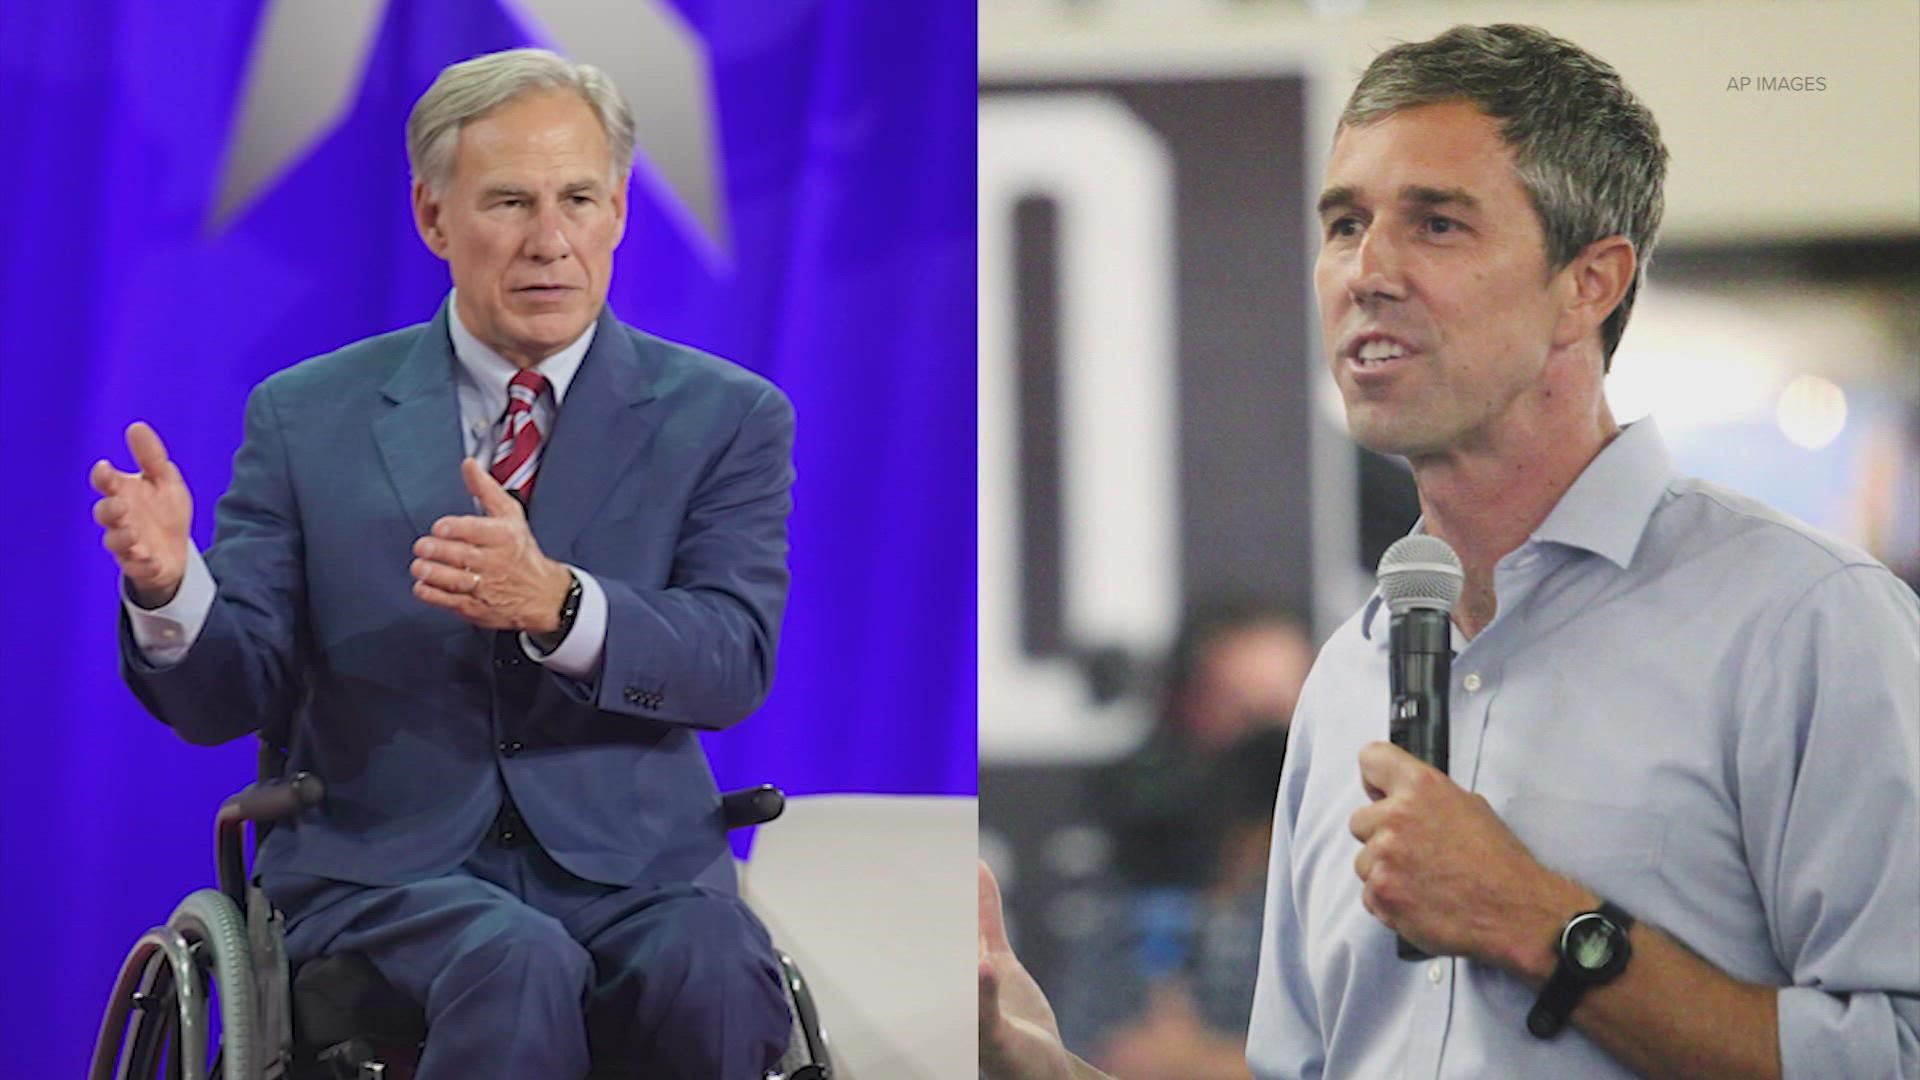 The race for Texas governor is continuing to heat up as polls show tightening margins.